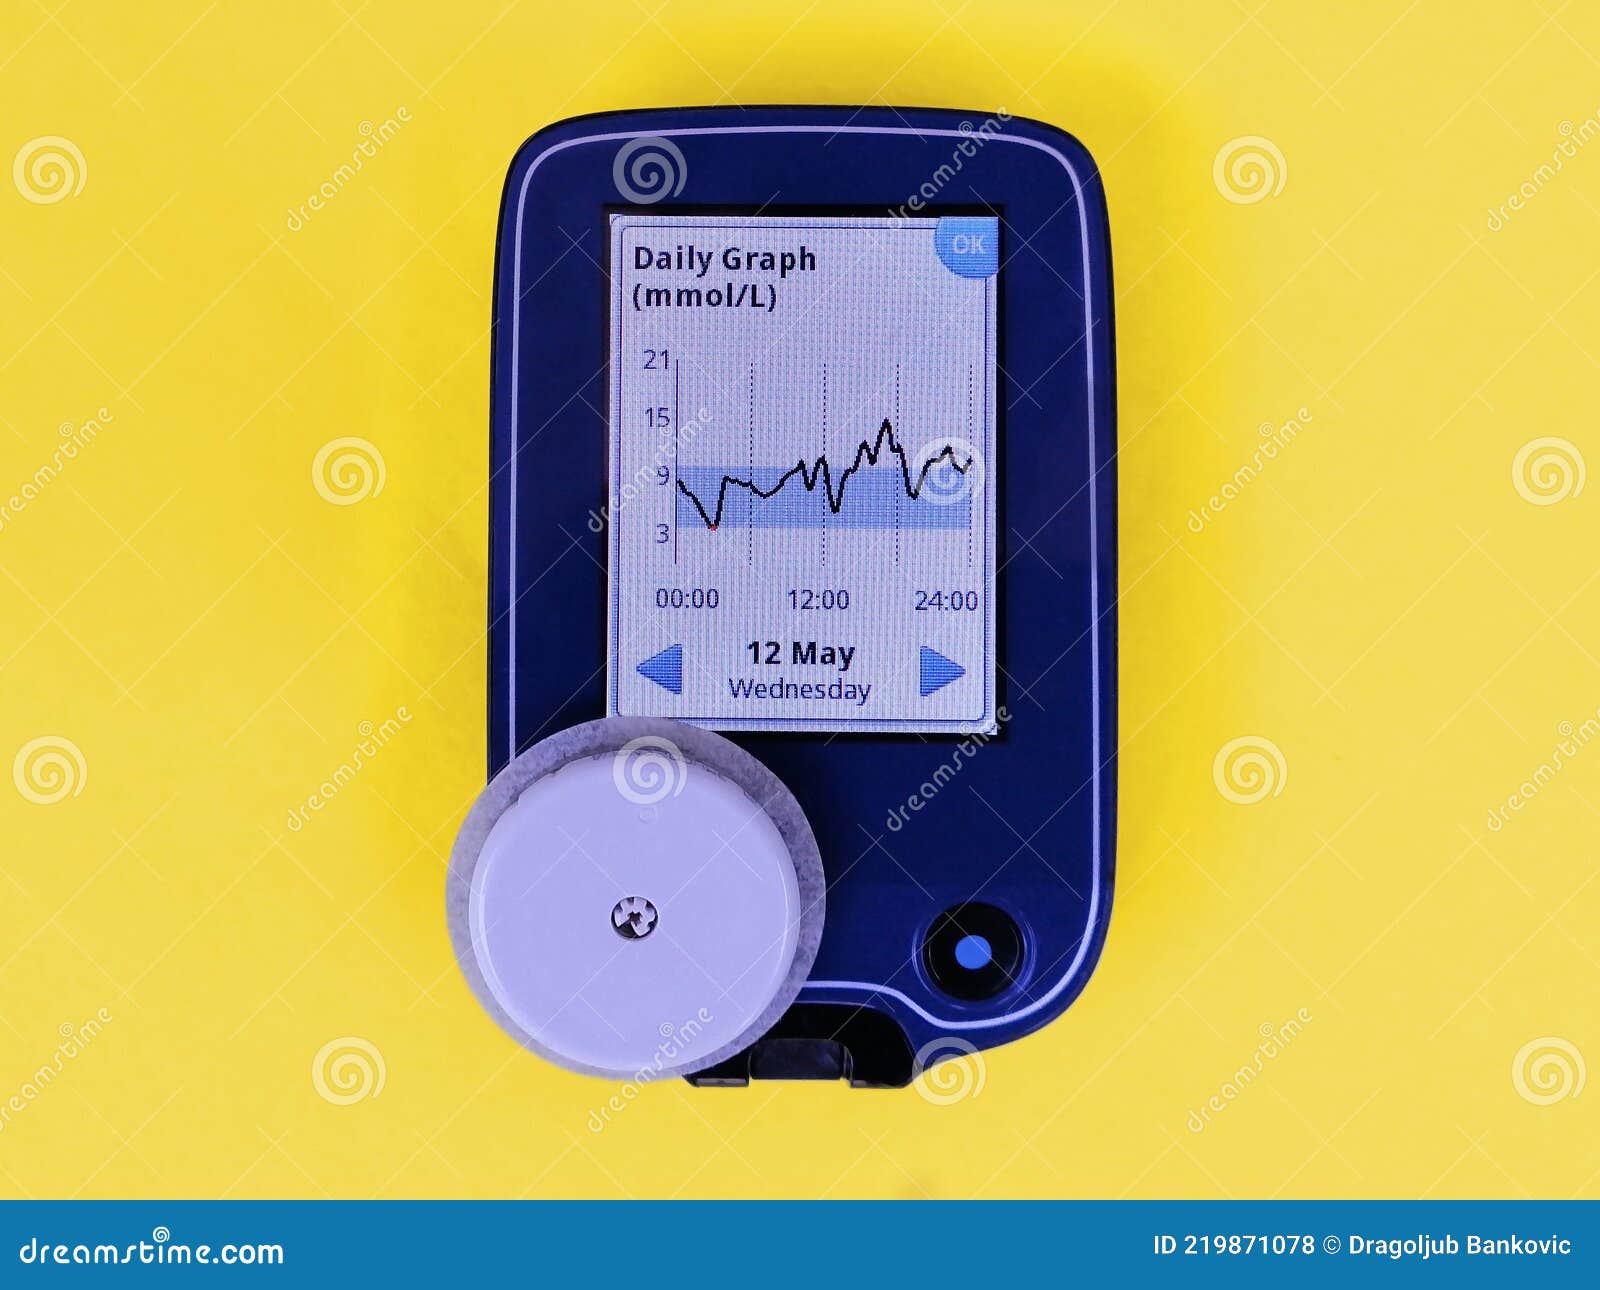 cgm device for continuous glucose monitoring and white sensor. daily graph on screen. yellow background.